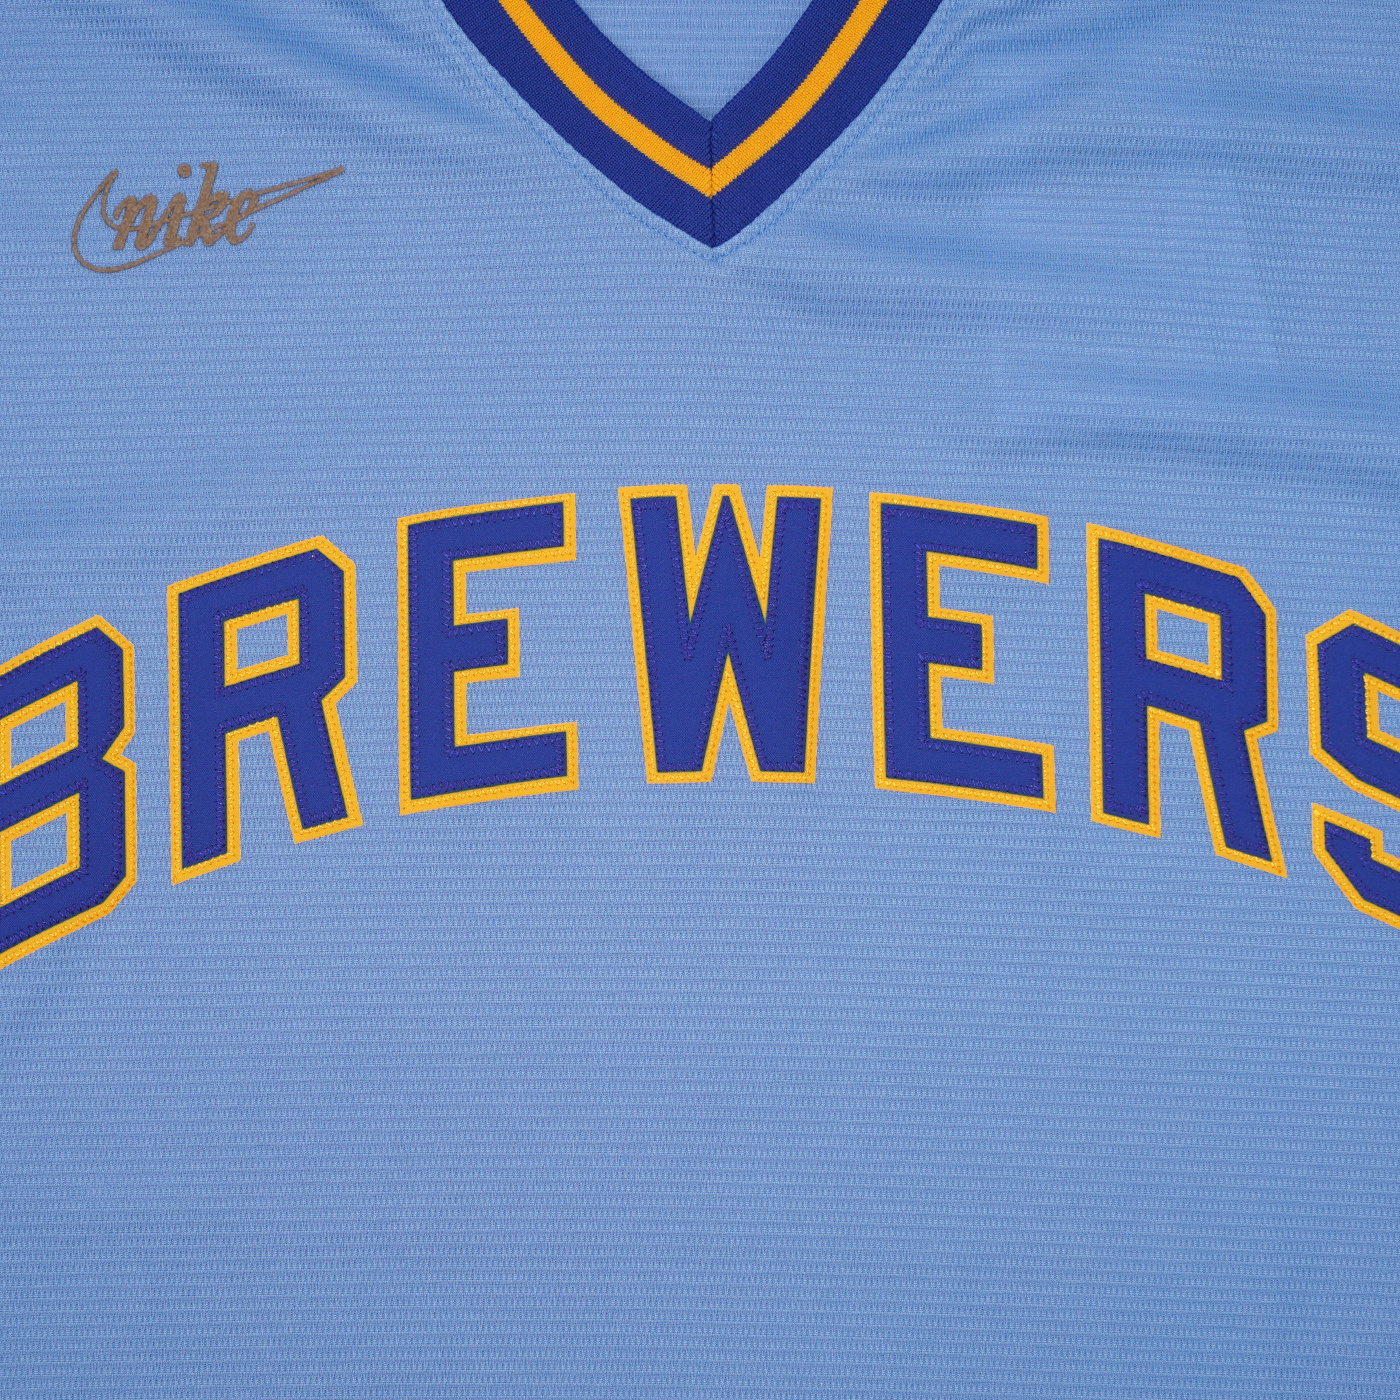 Men's Nike Powder Blue Milwaukee Brewers Road Cooperstown Collection Team Jersey